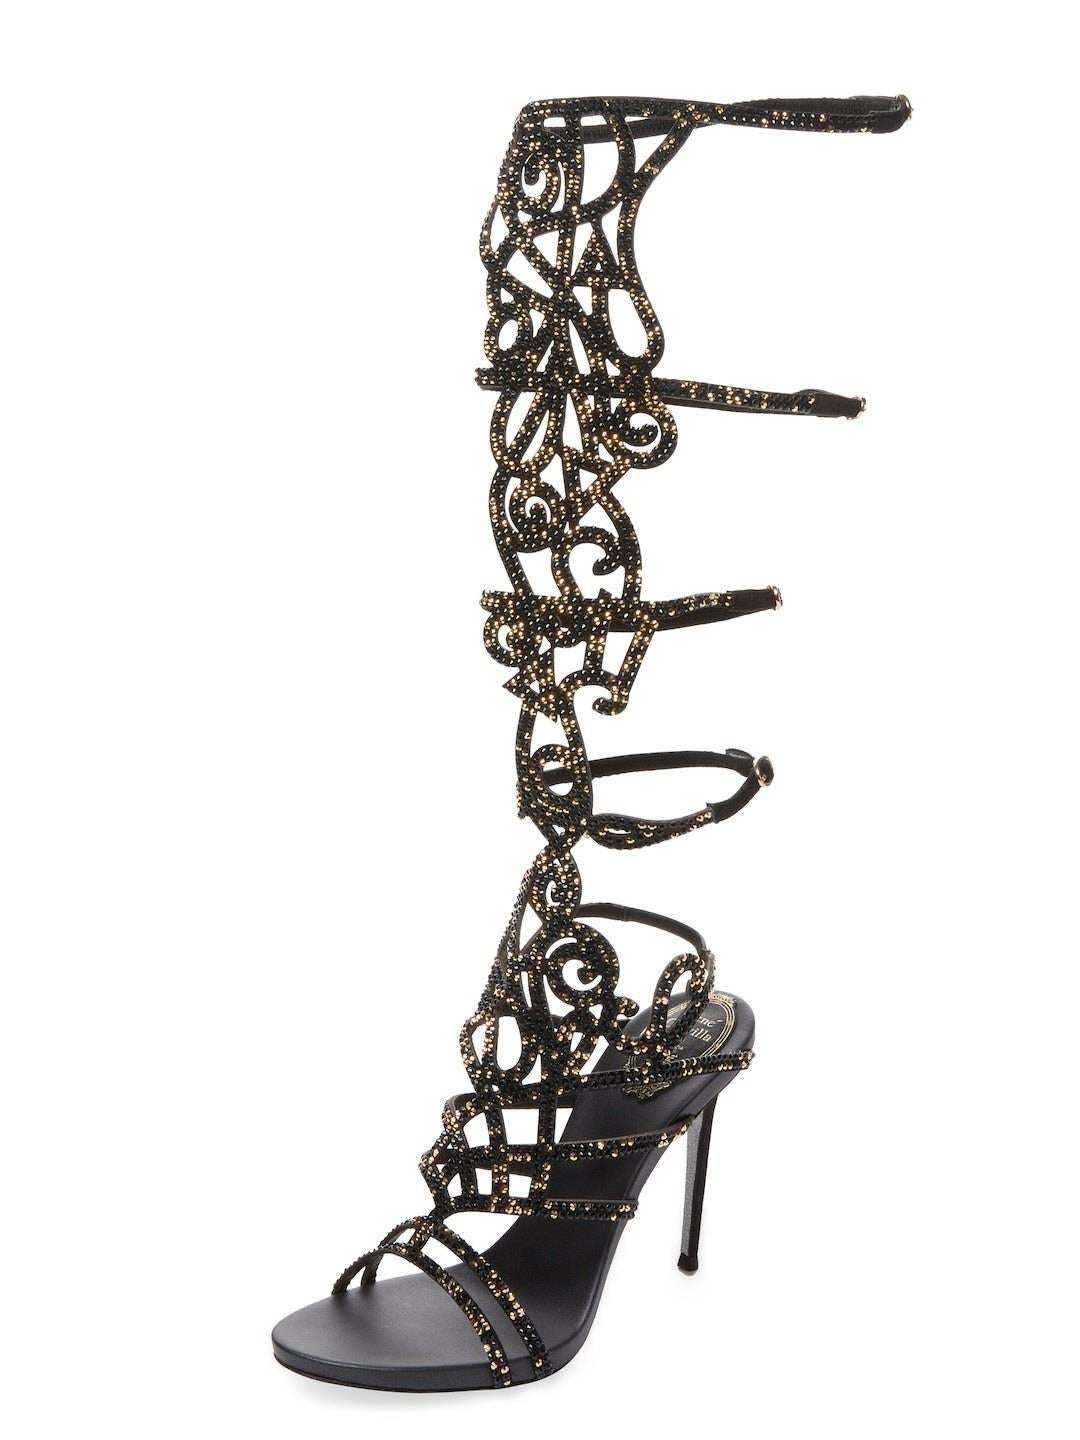 Rene Caovilla Knee-High Gladiator Sandals.
Designer size 36 - US 6
Leather upper with Swarovski crystals - black and gold.
4 inches heel, Leather Lining, Gold Tone Buckles.
15 inches H shaft with Buckled Straps.
Signature Glittered Sole.
Made in